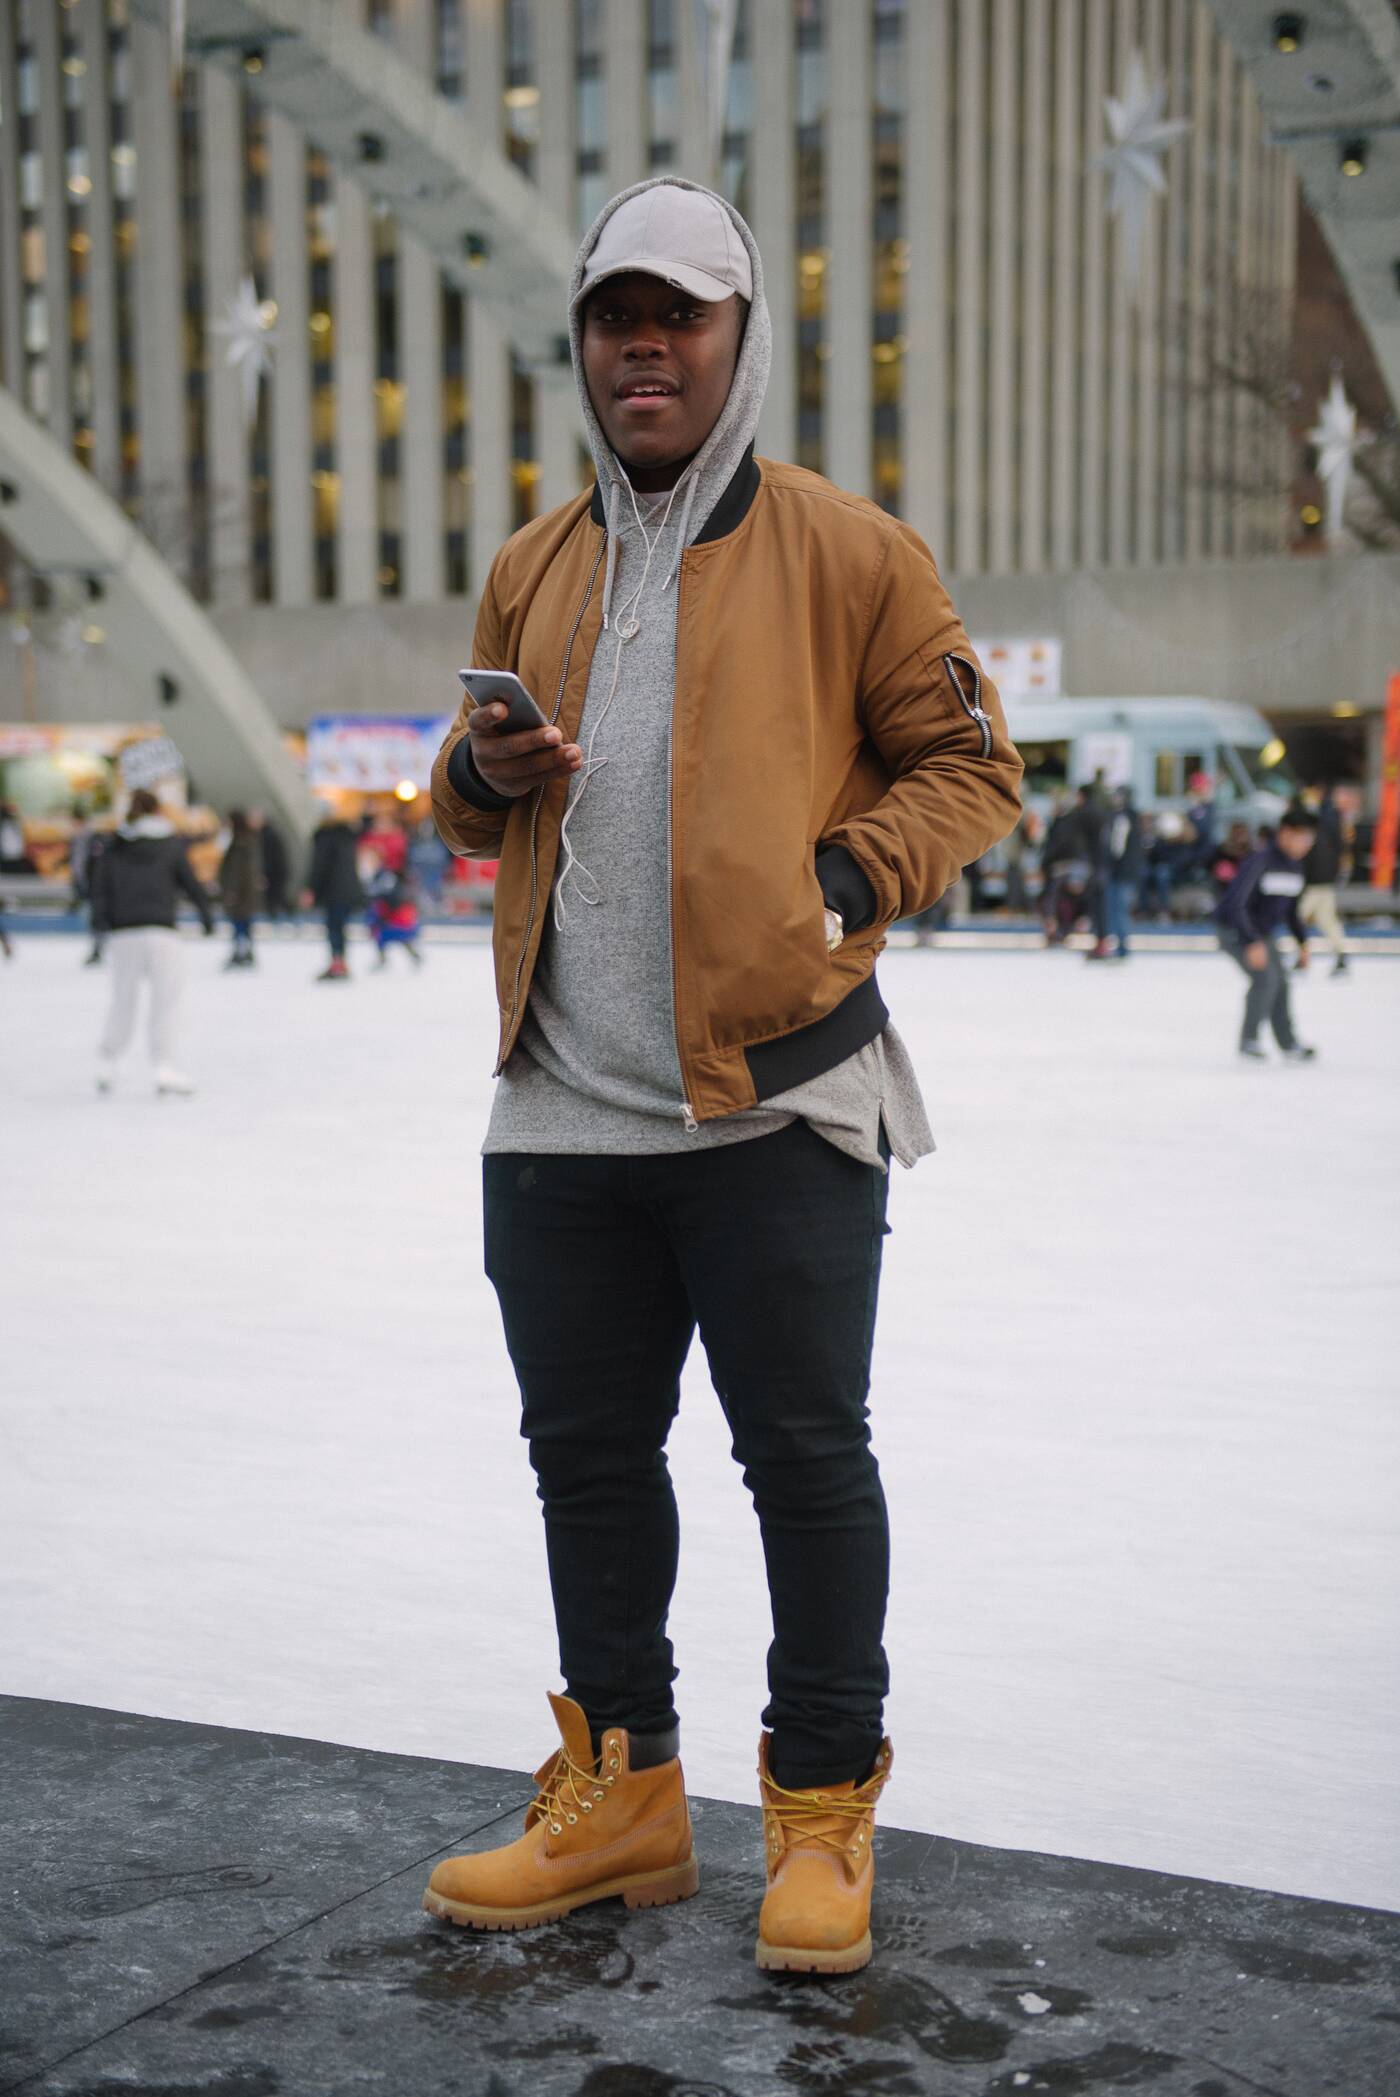 Street Style: 20 winter looks at Nathan Phillips Square